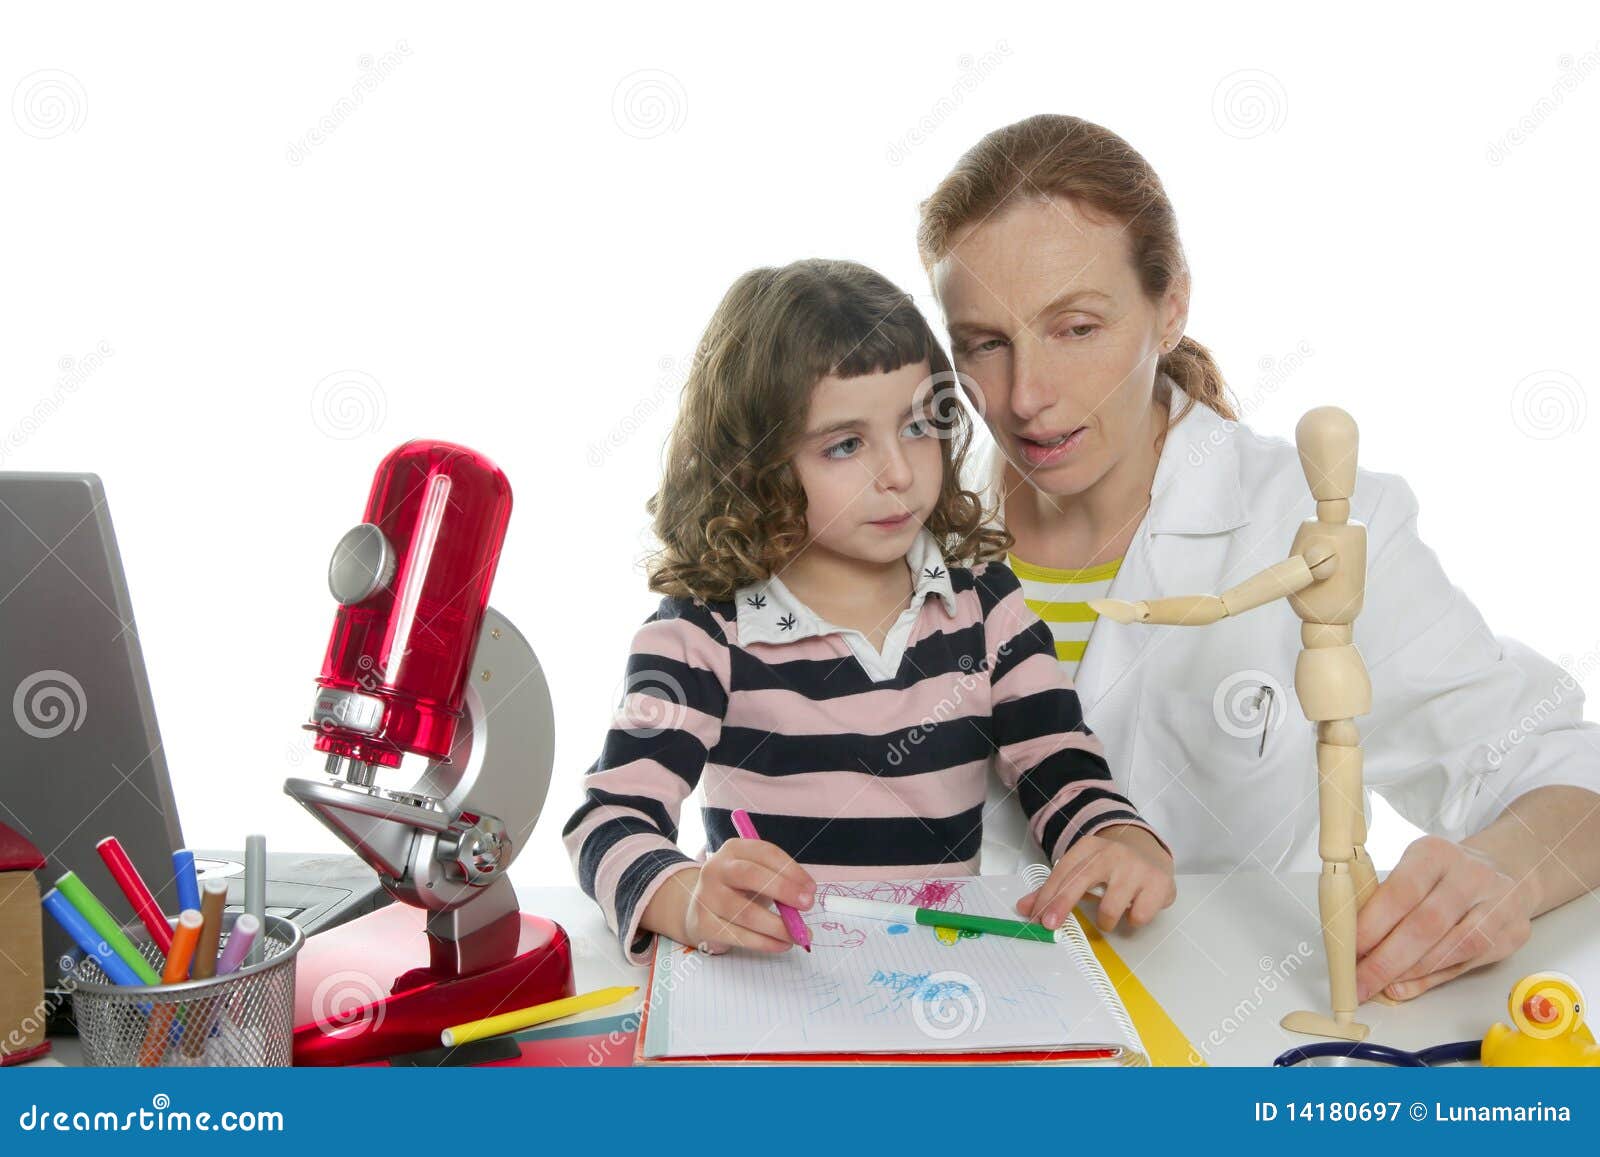 doctor natural sciences teaching school pupil